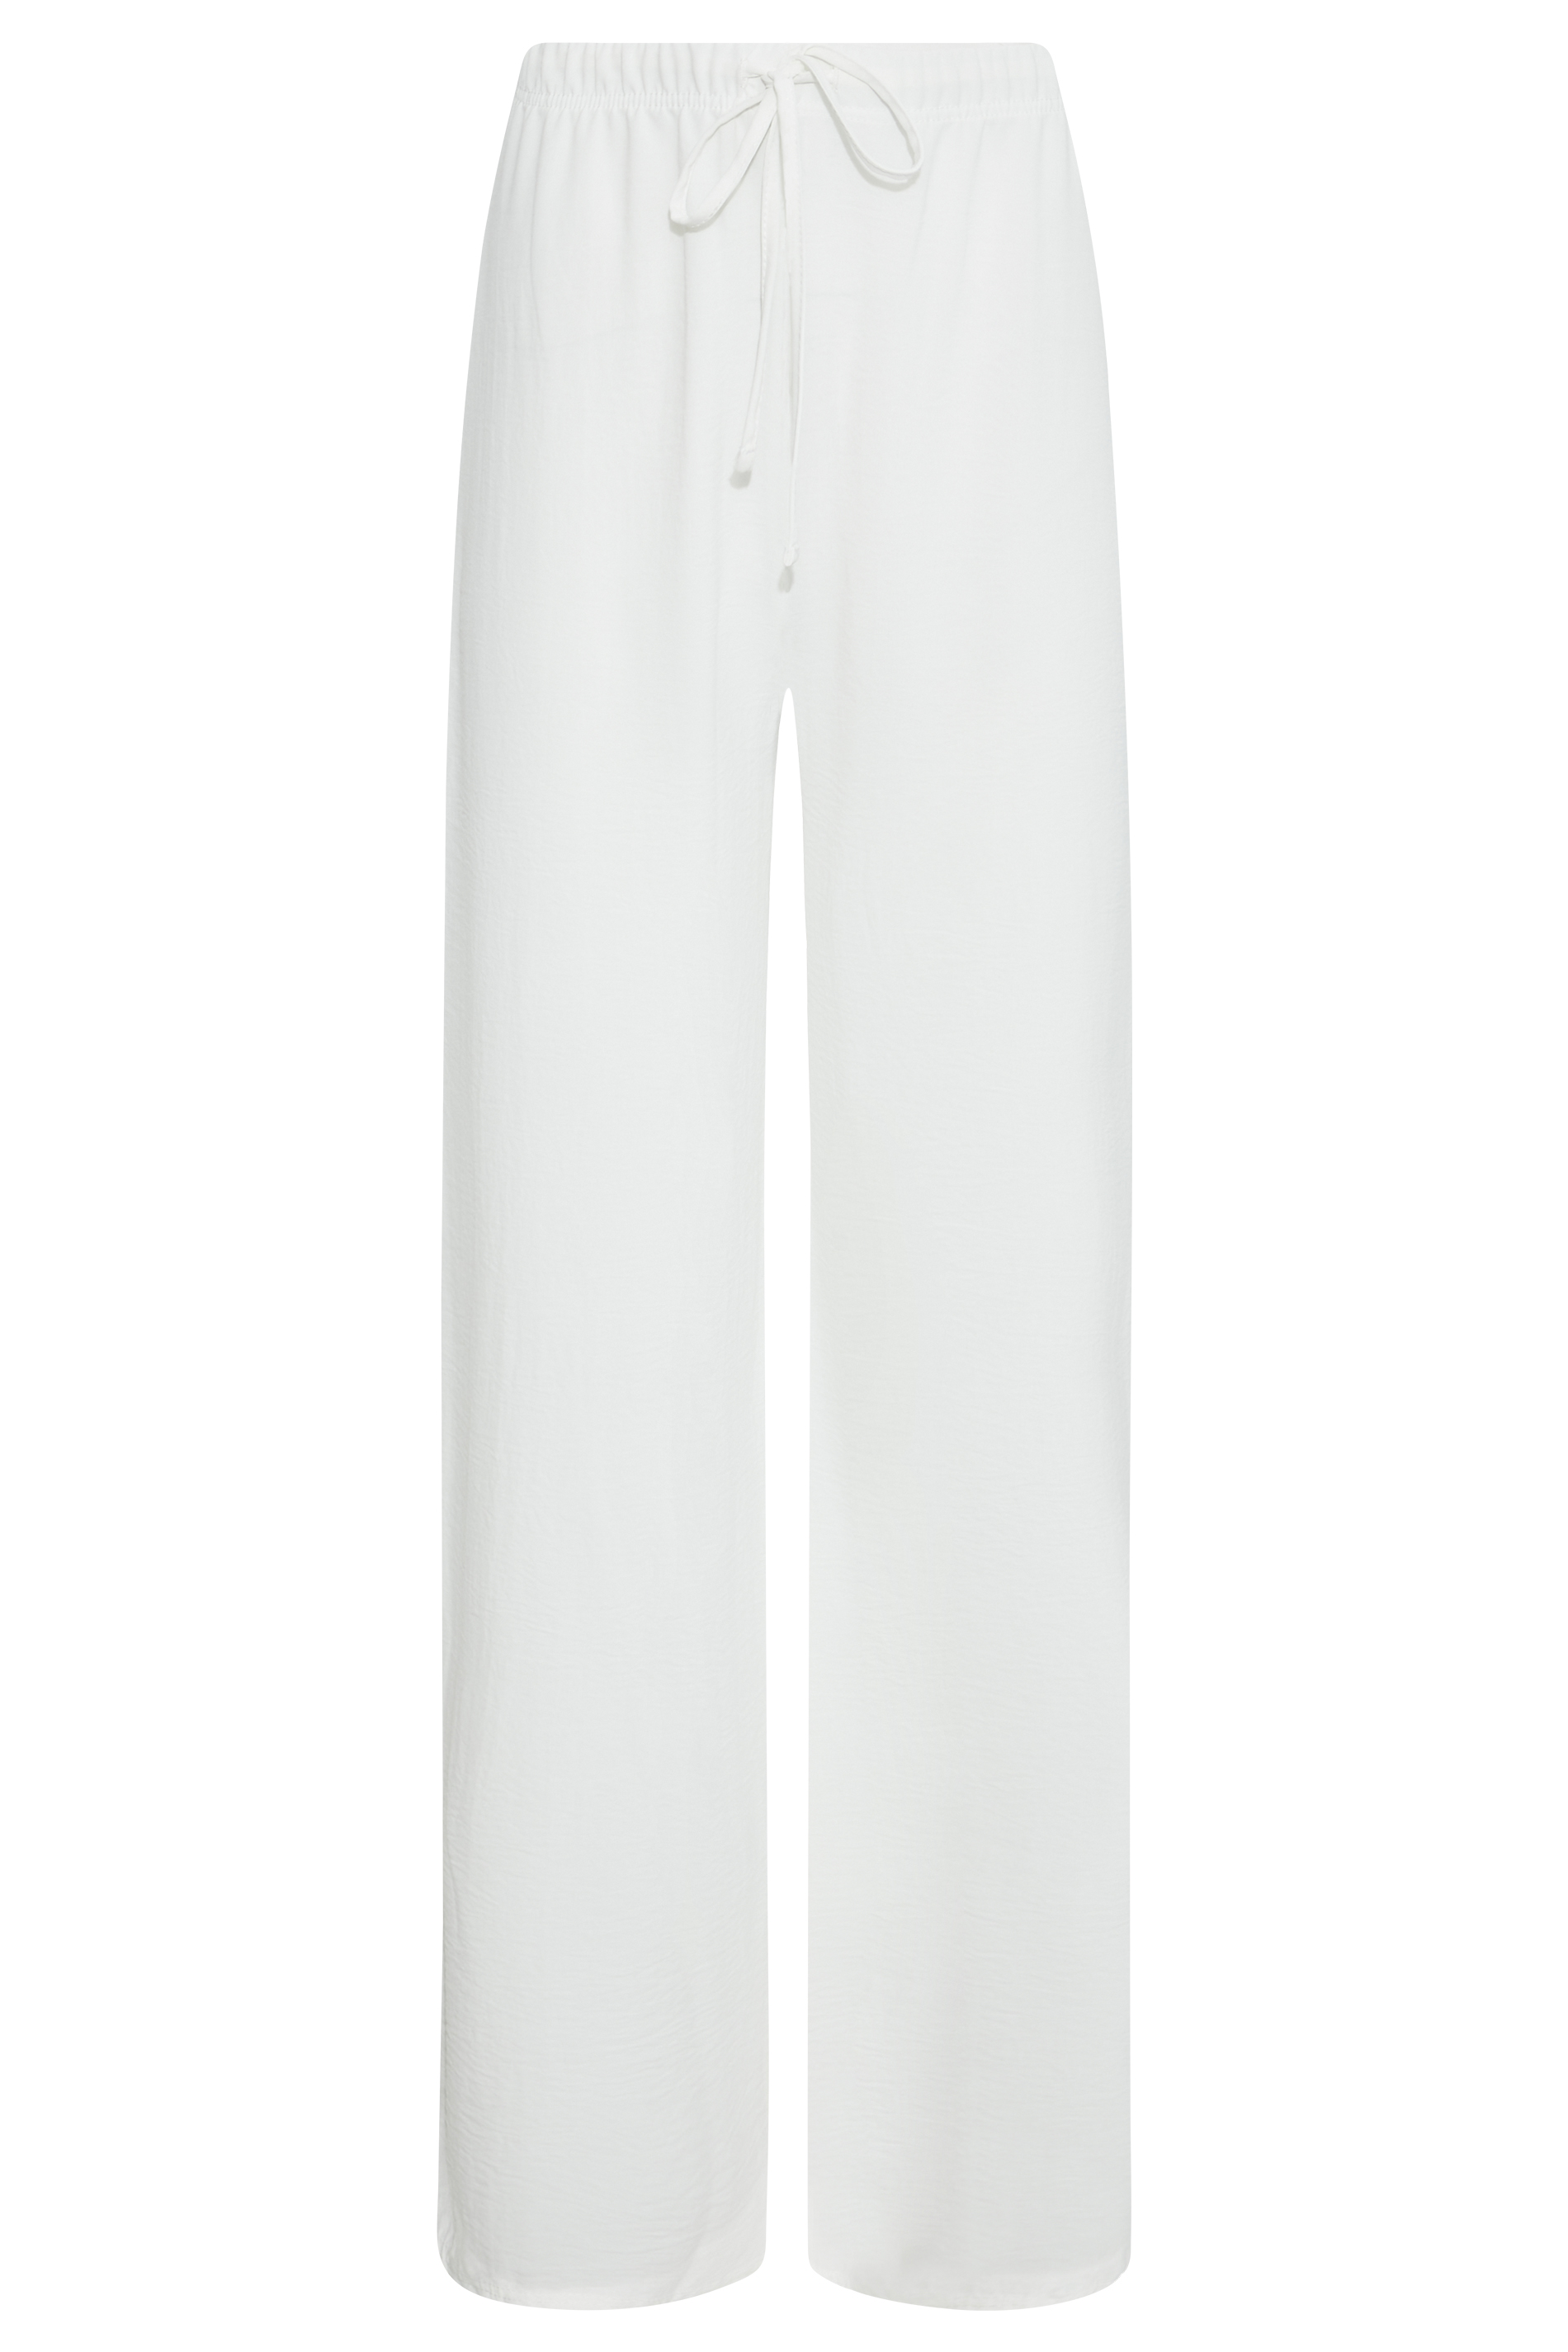 Live Unlimited Crepe Wide Leg Trousers White at John Lewis  Partners